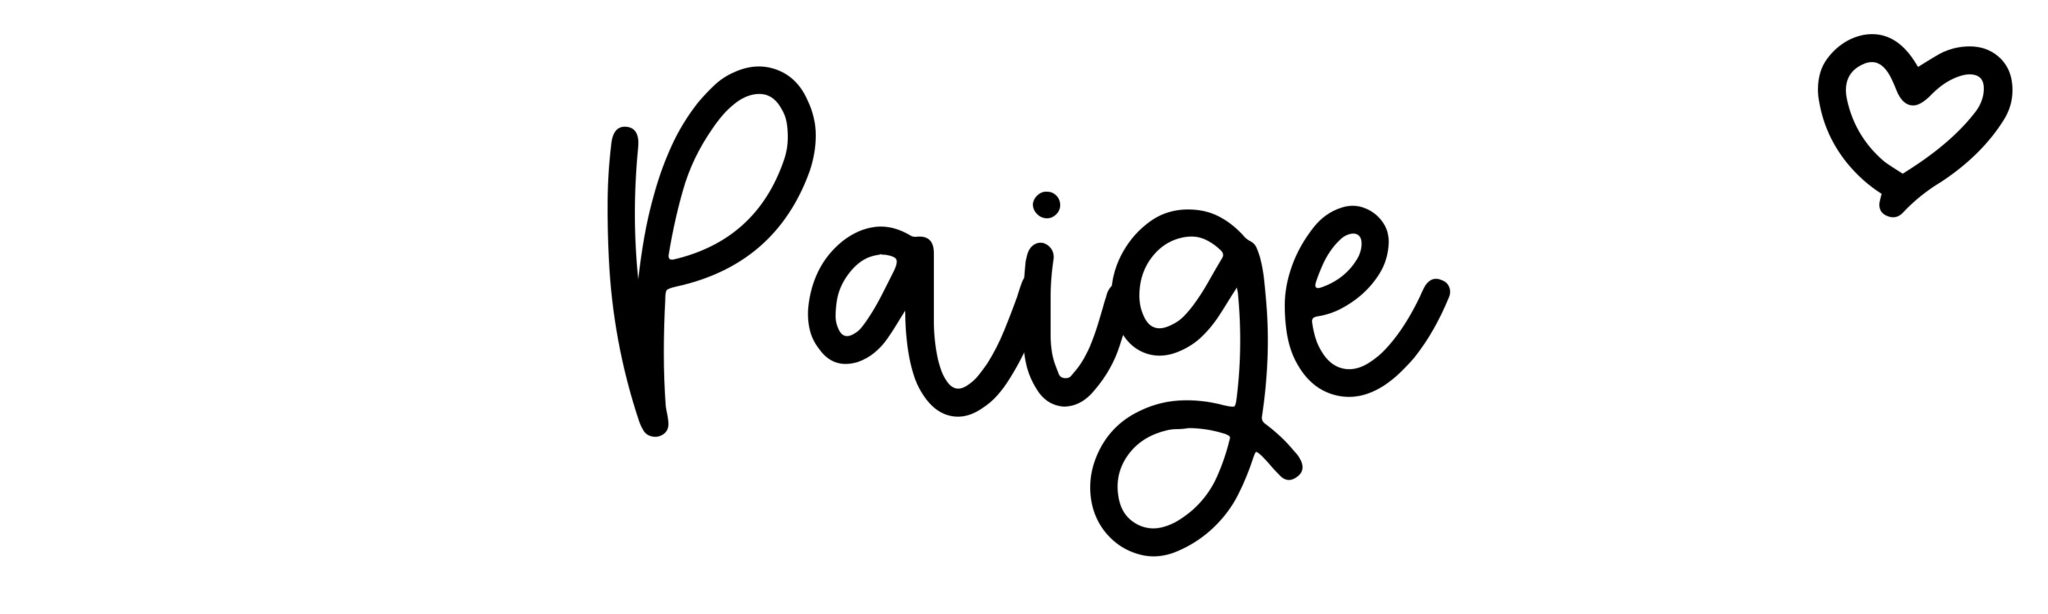 Paige - Name meaning, origin, variations and more